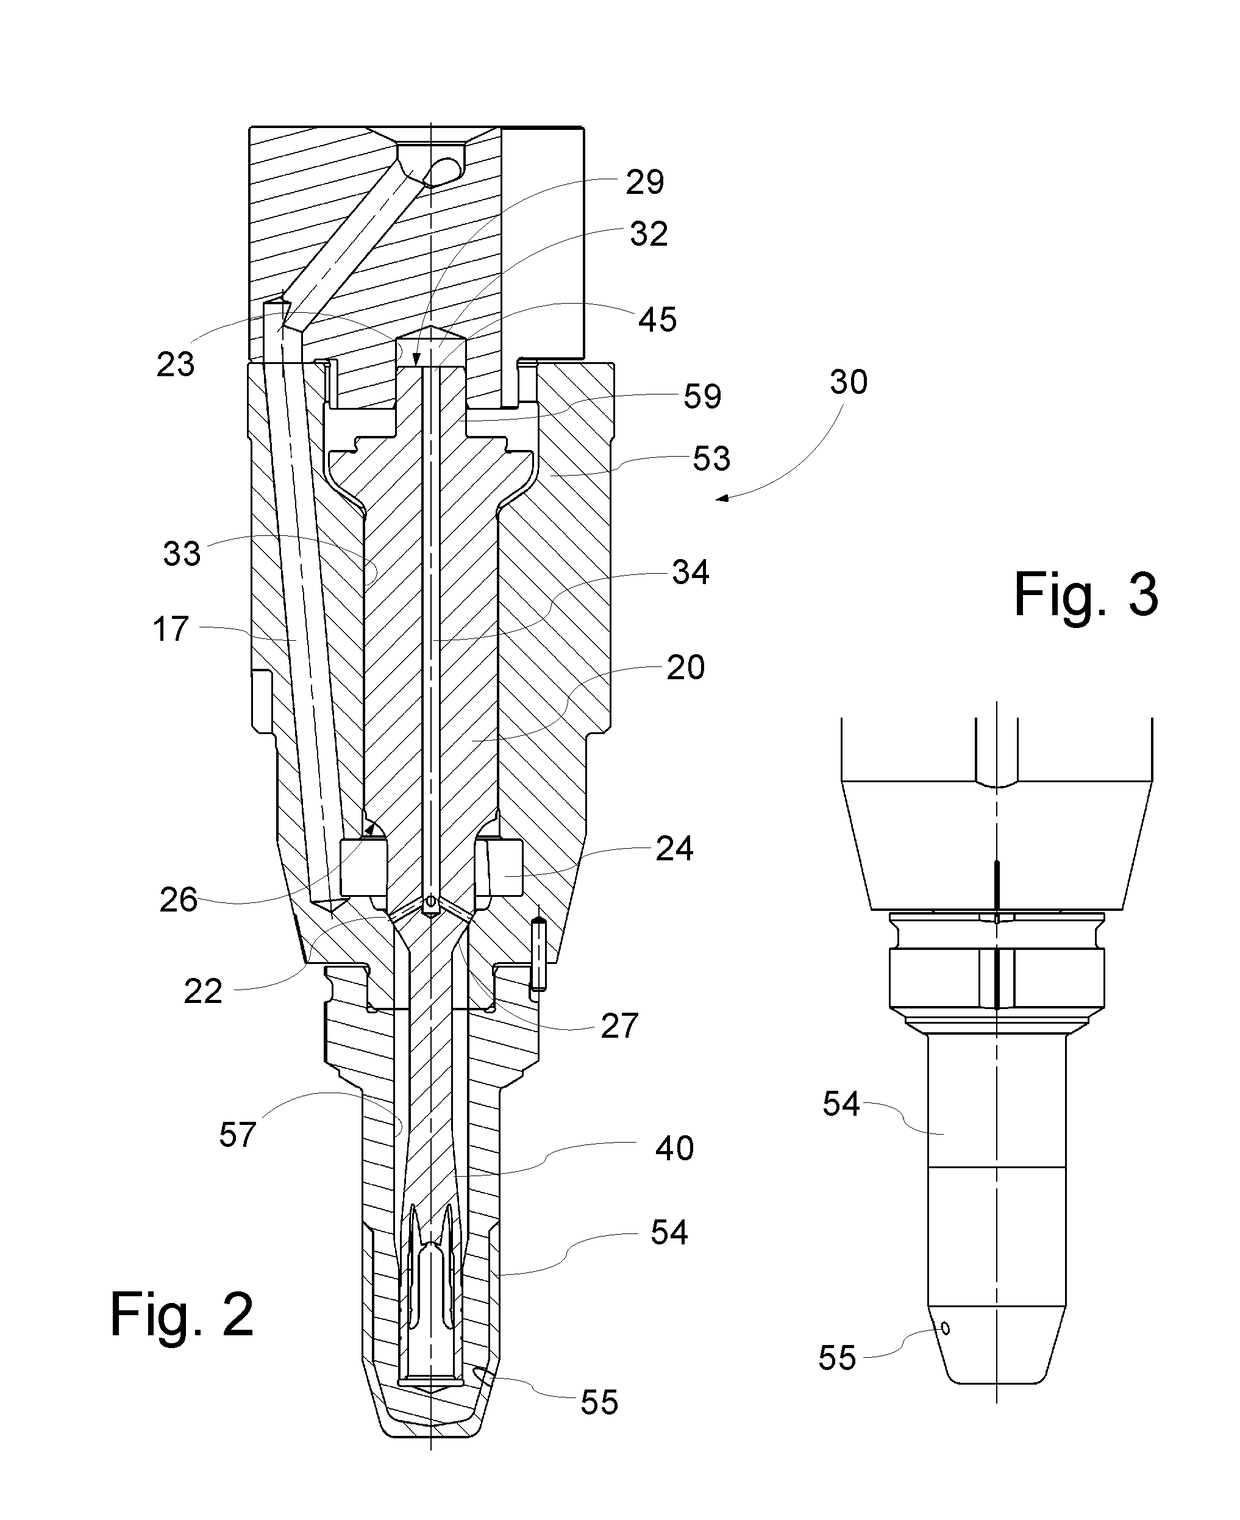 A fuel valve for a large two-stroke self-igniting internal combustion engine